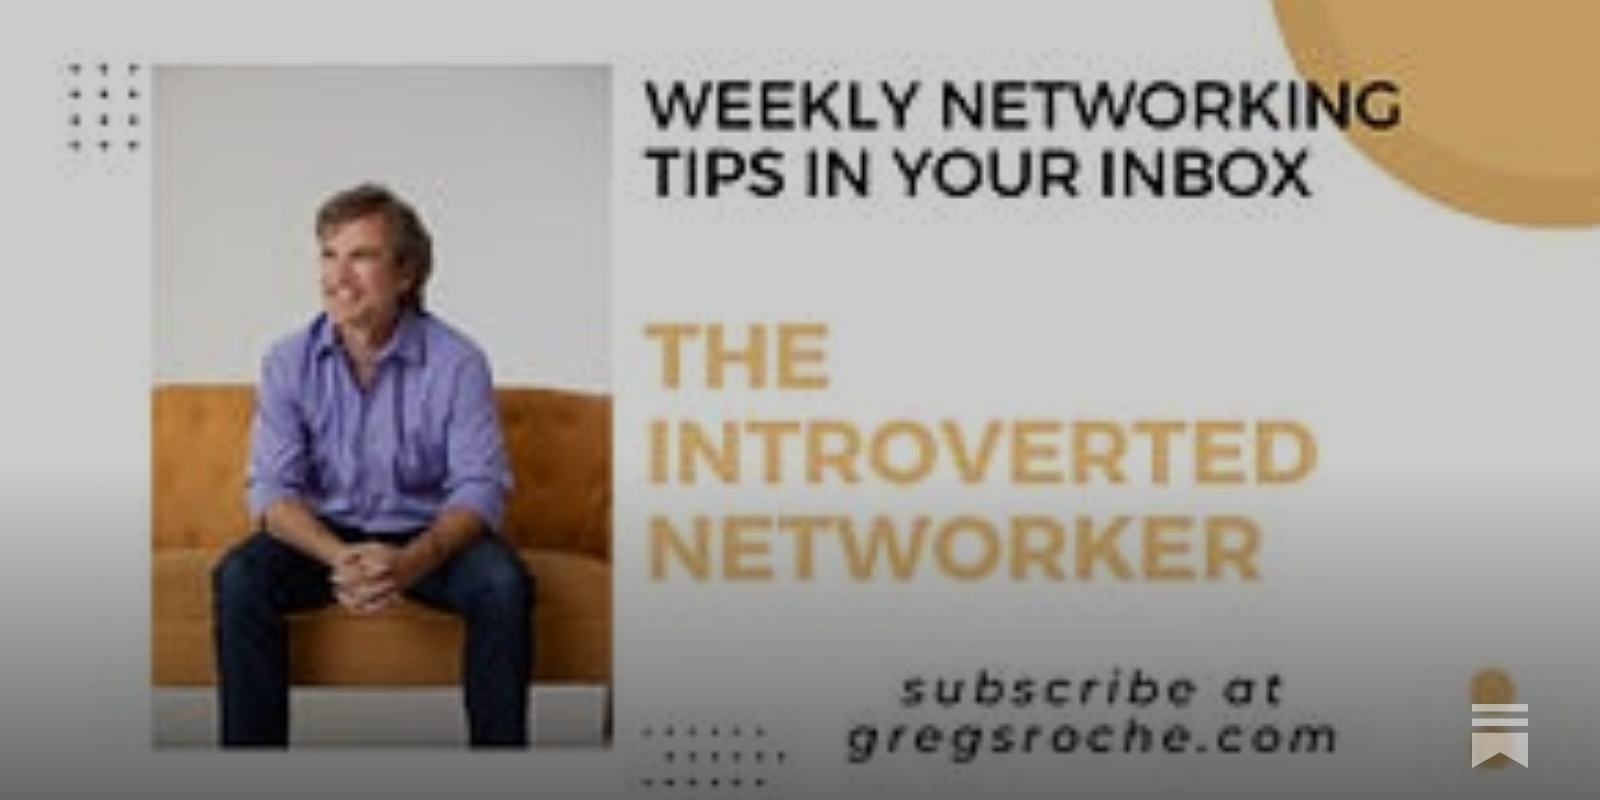 Networking for introverts: a how-to guide